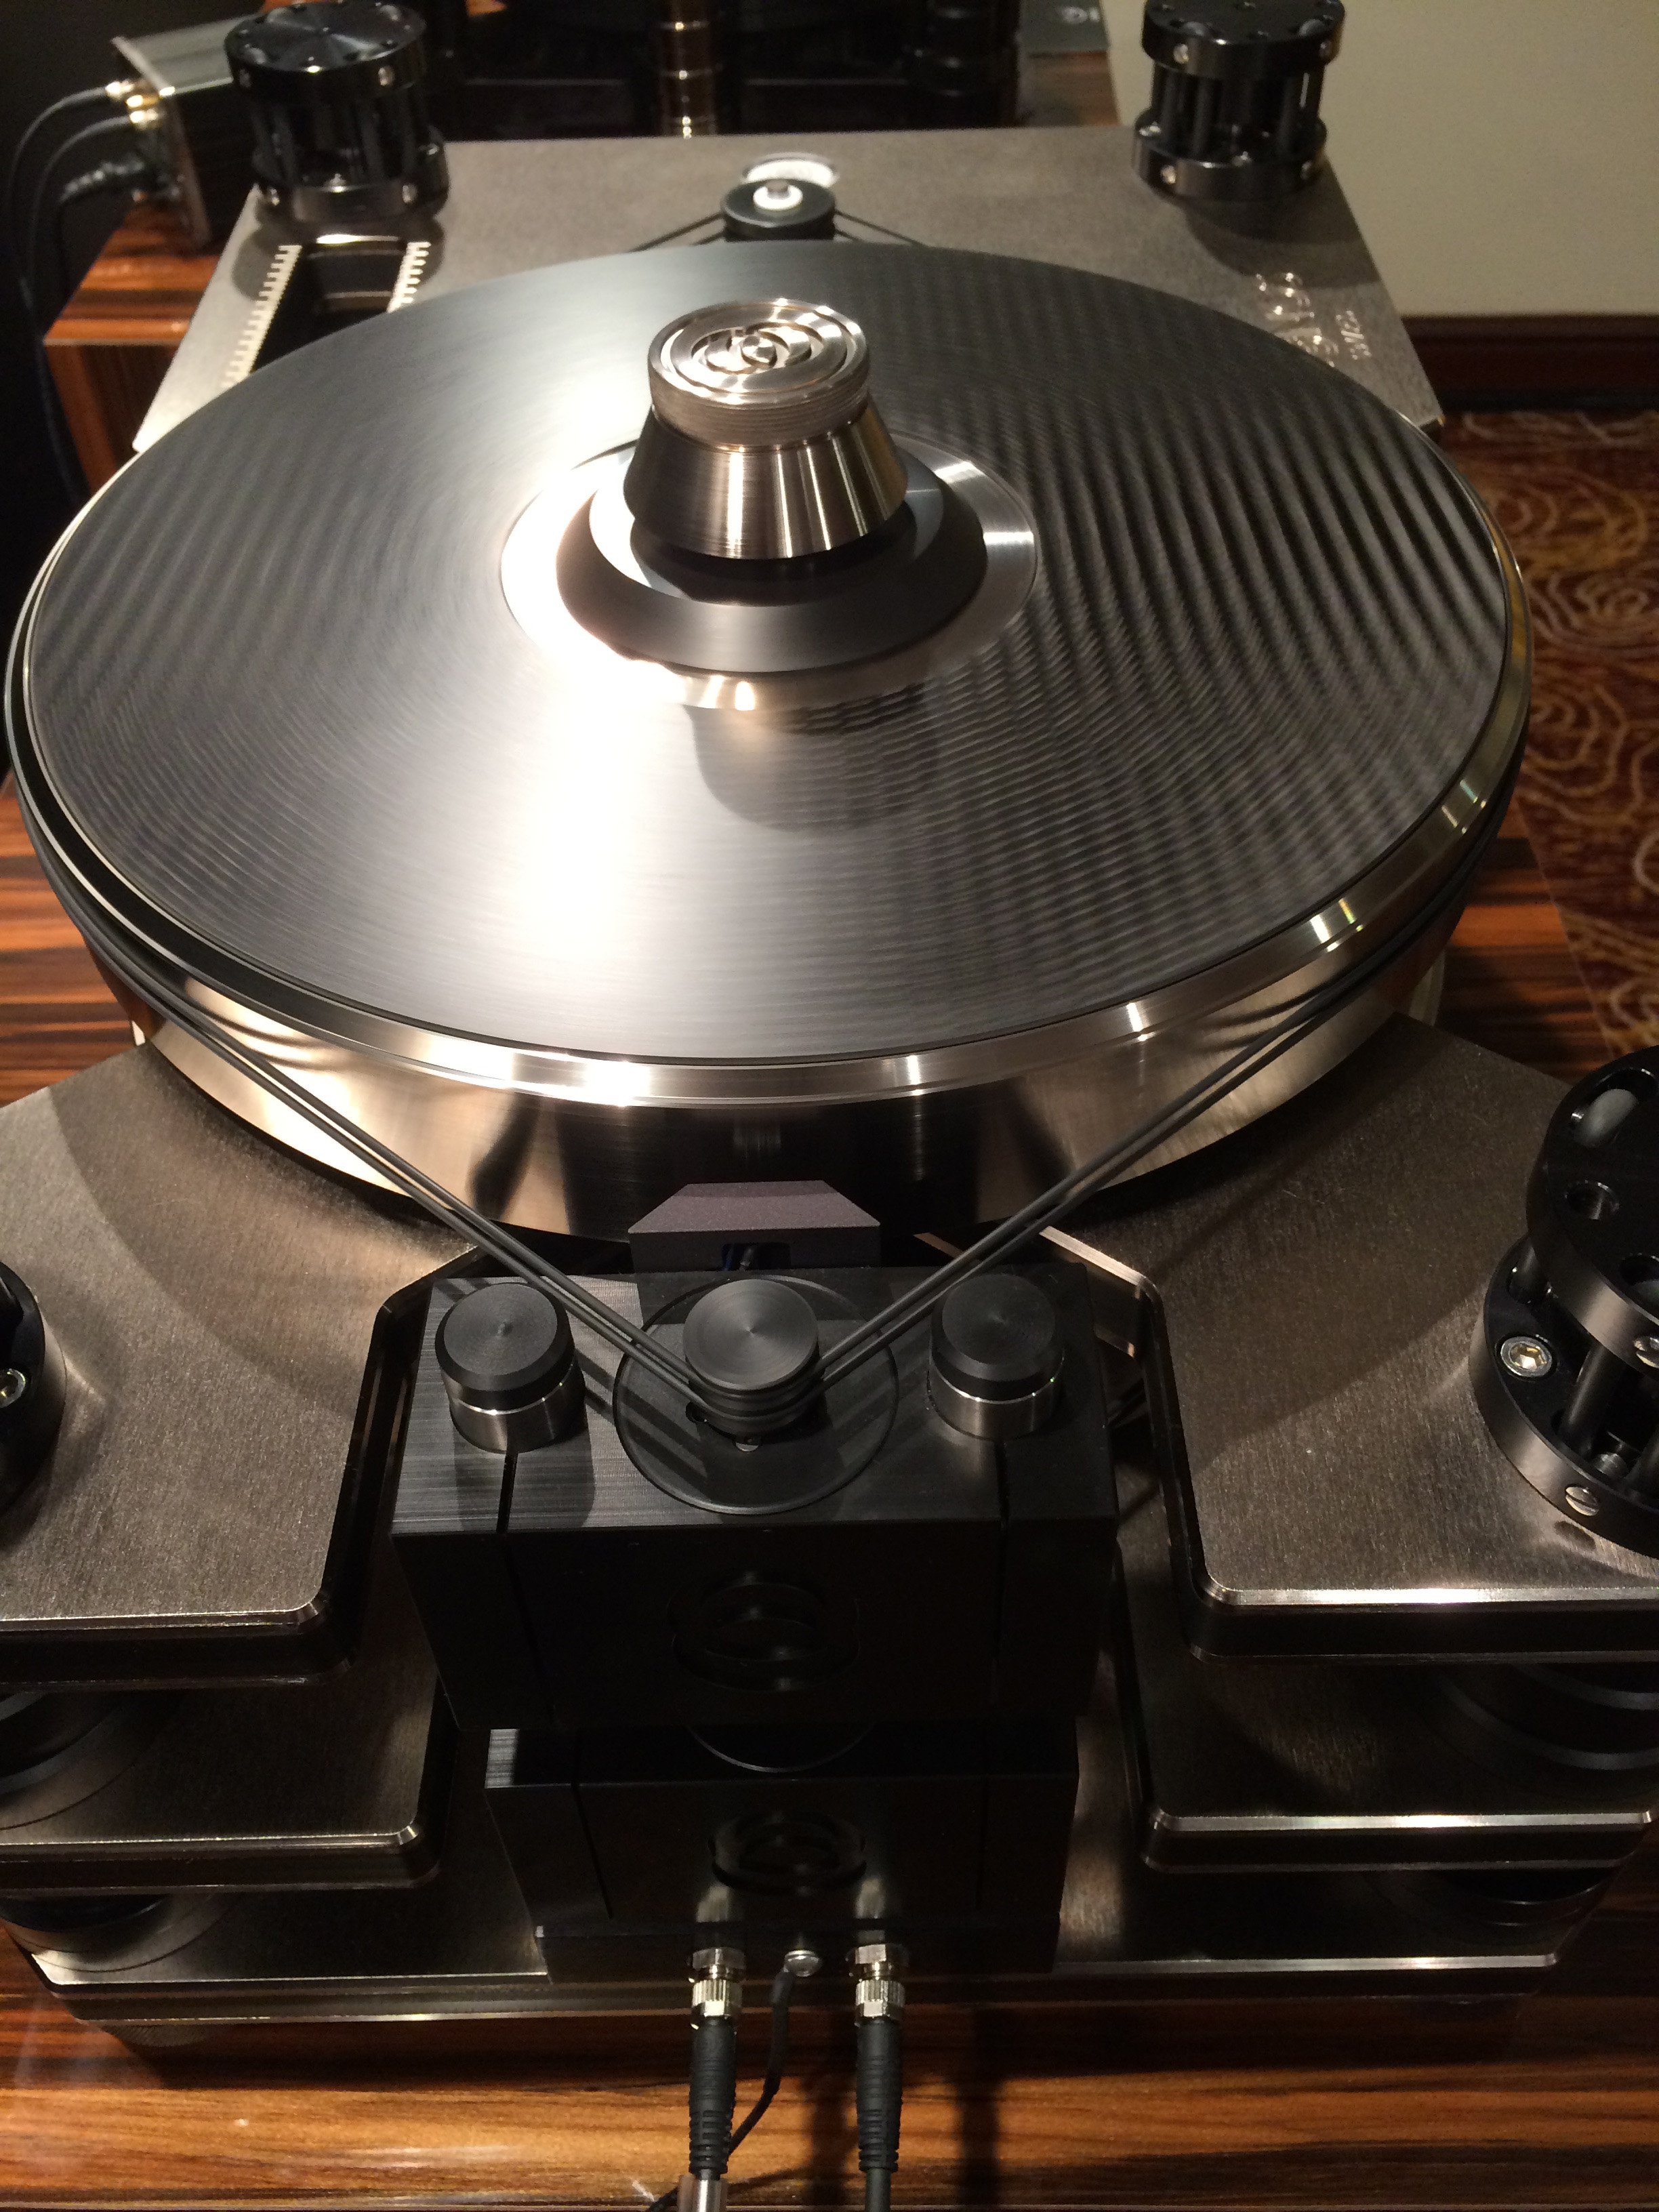 The Kronos Pro is a masterclass in turntable engineering